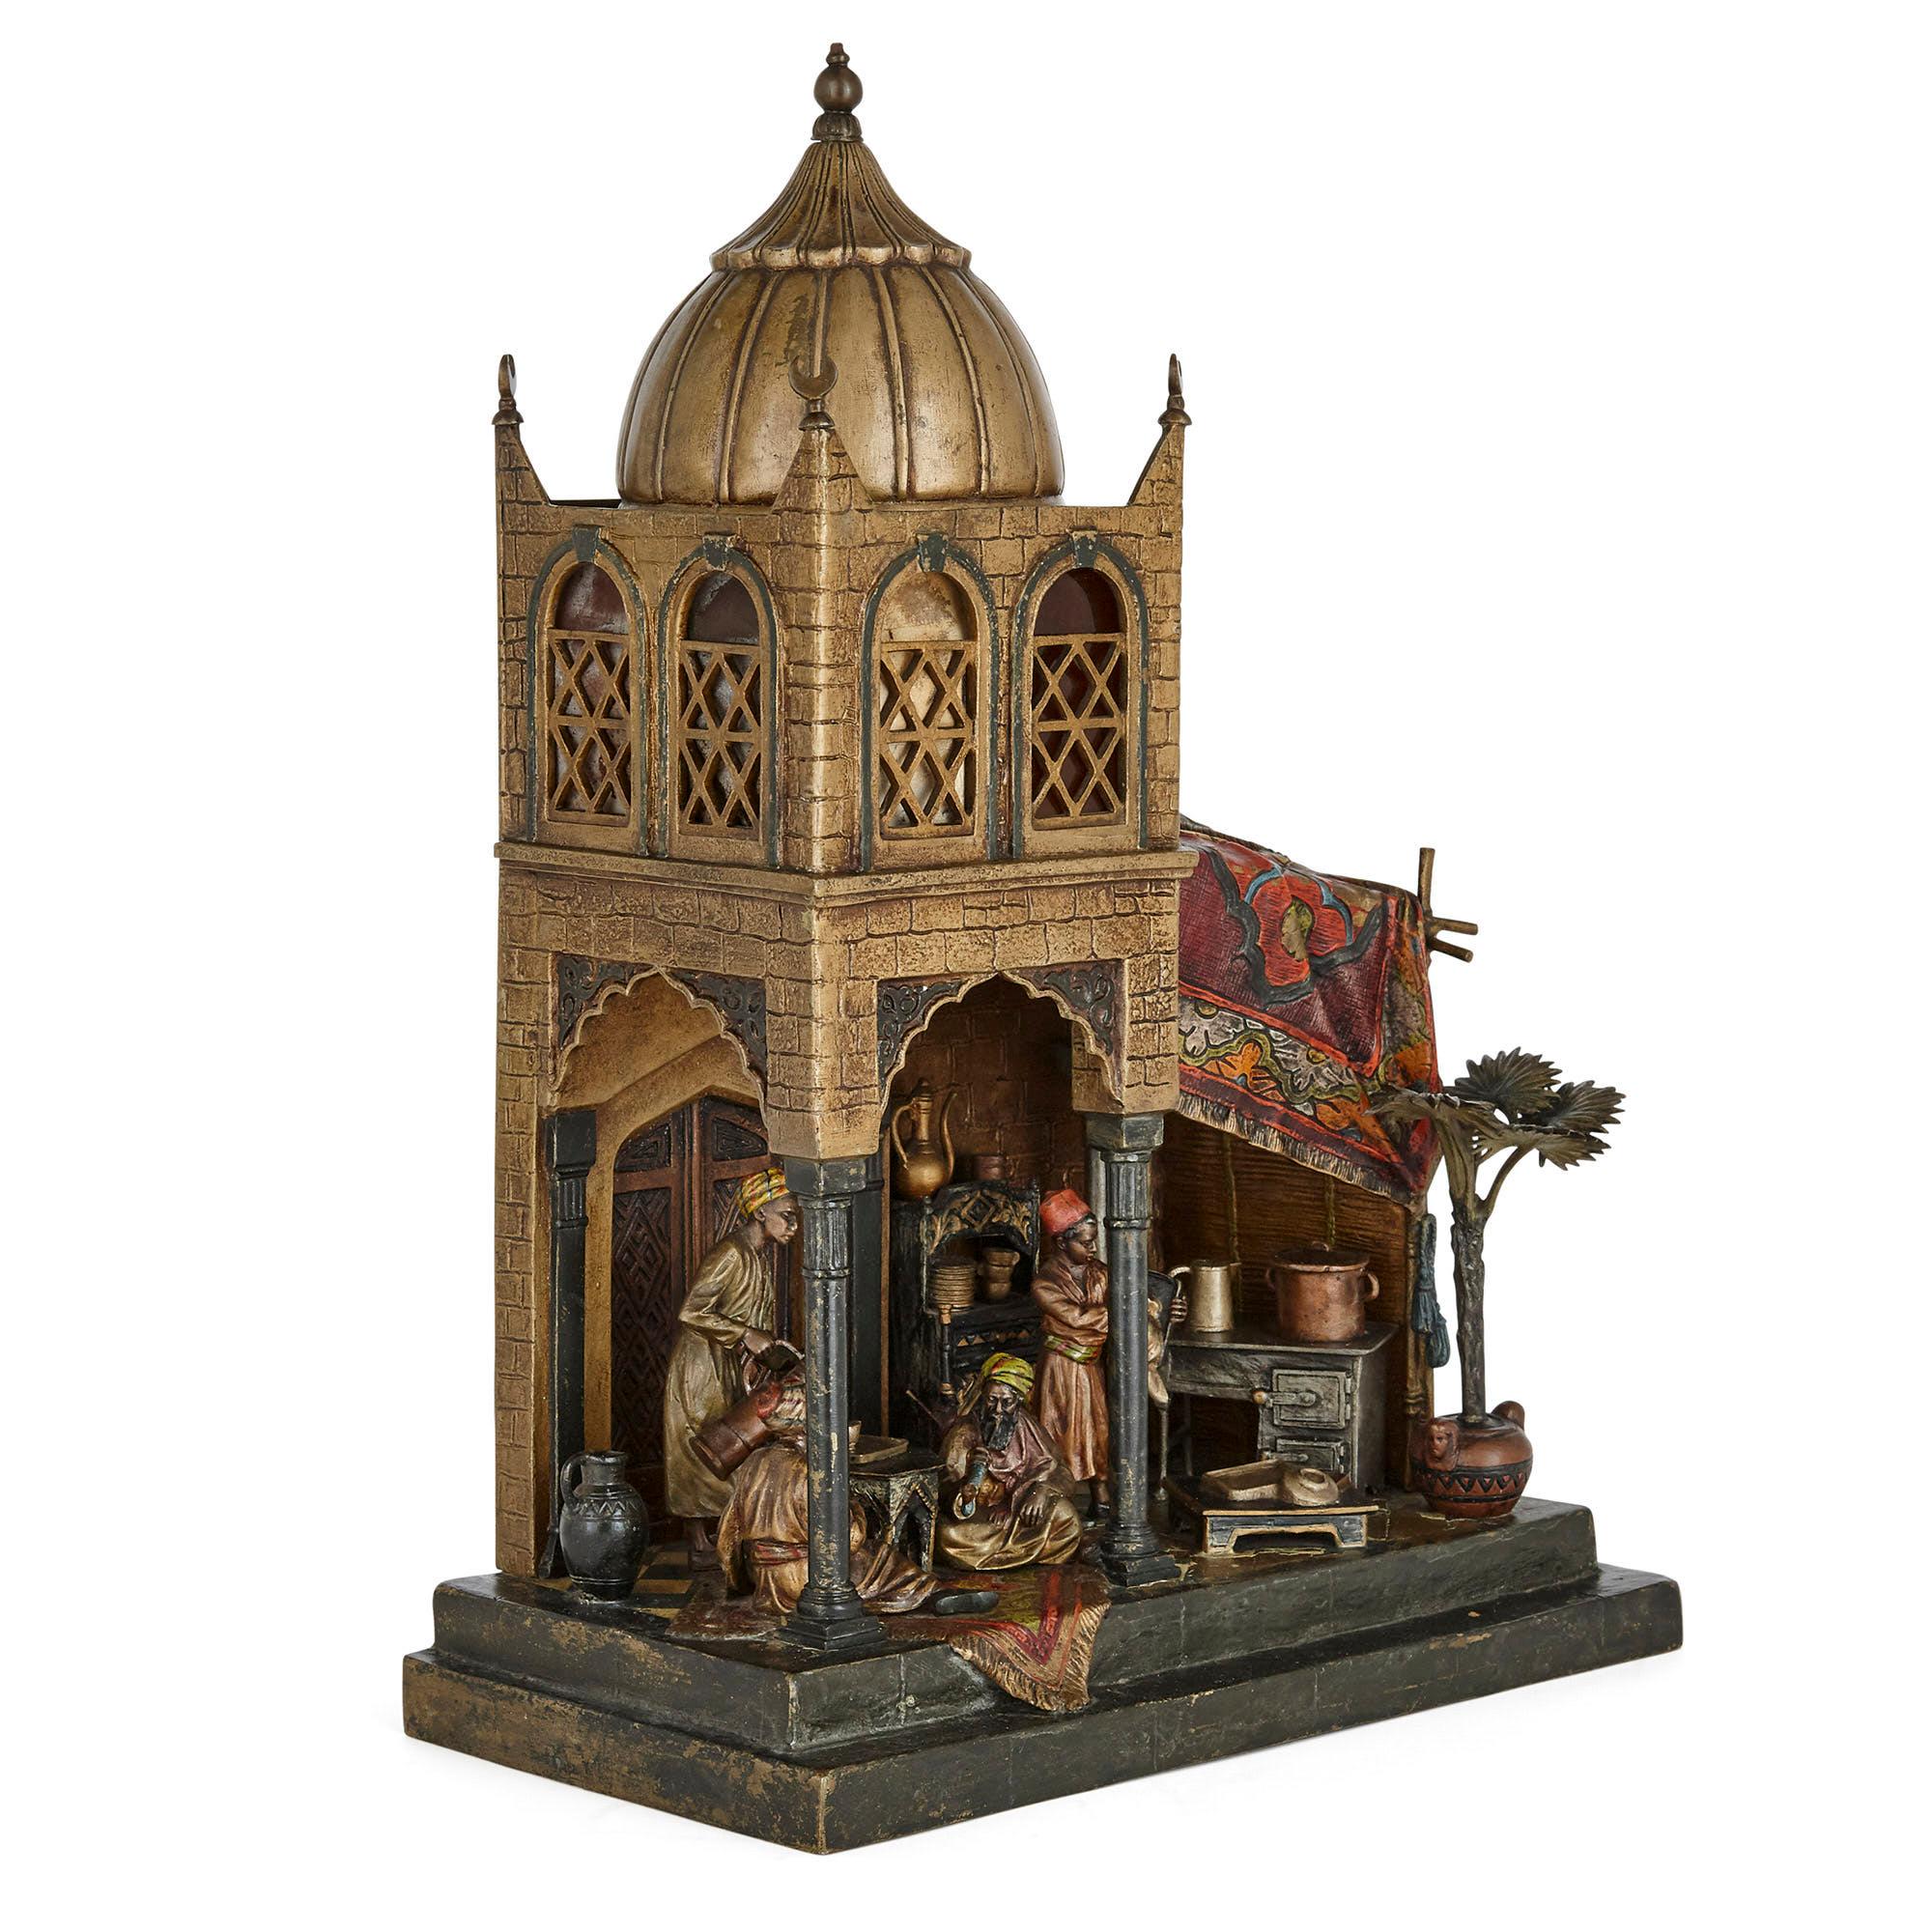 Austrian Orientalist bronze model lamp by Anton Chotka.

This charming cold-painted bronze lamp depicts a busy scene of an open plan coffee shop within an Islamic style building, which features a dome ceiling, crescent moon finials and Moorish